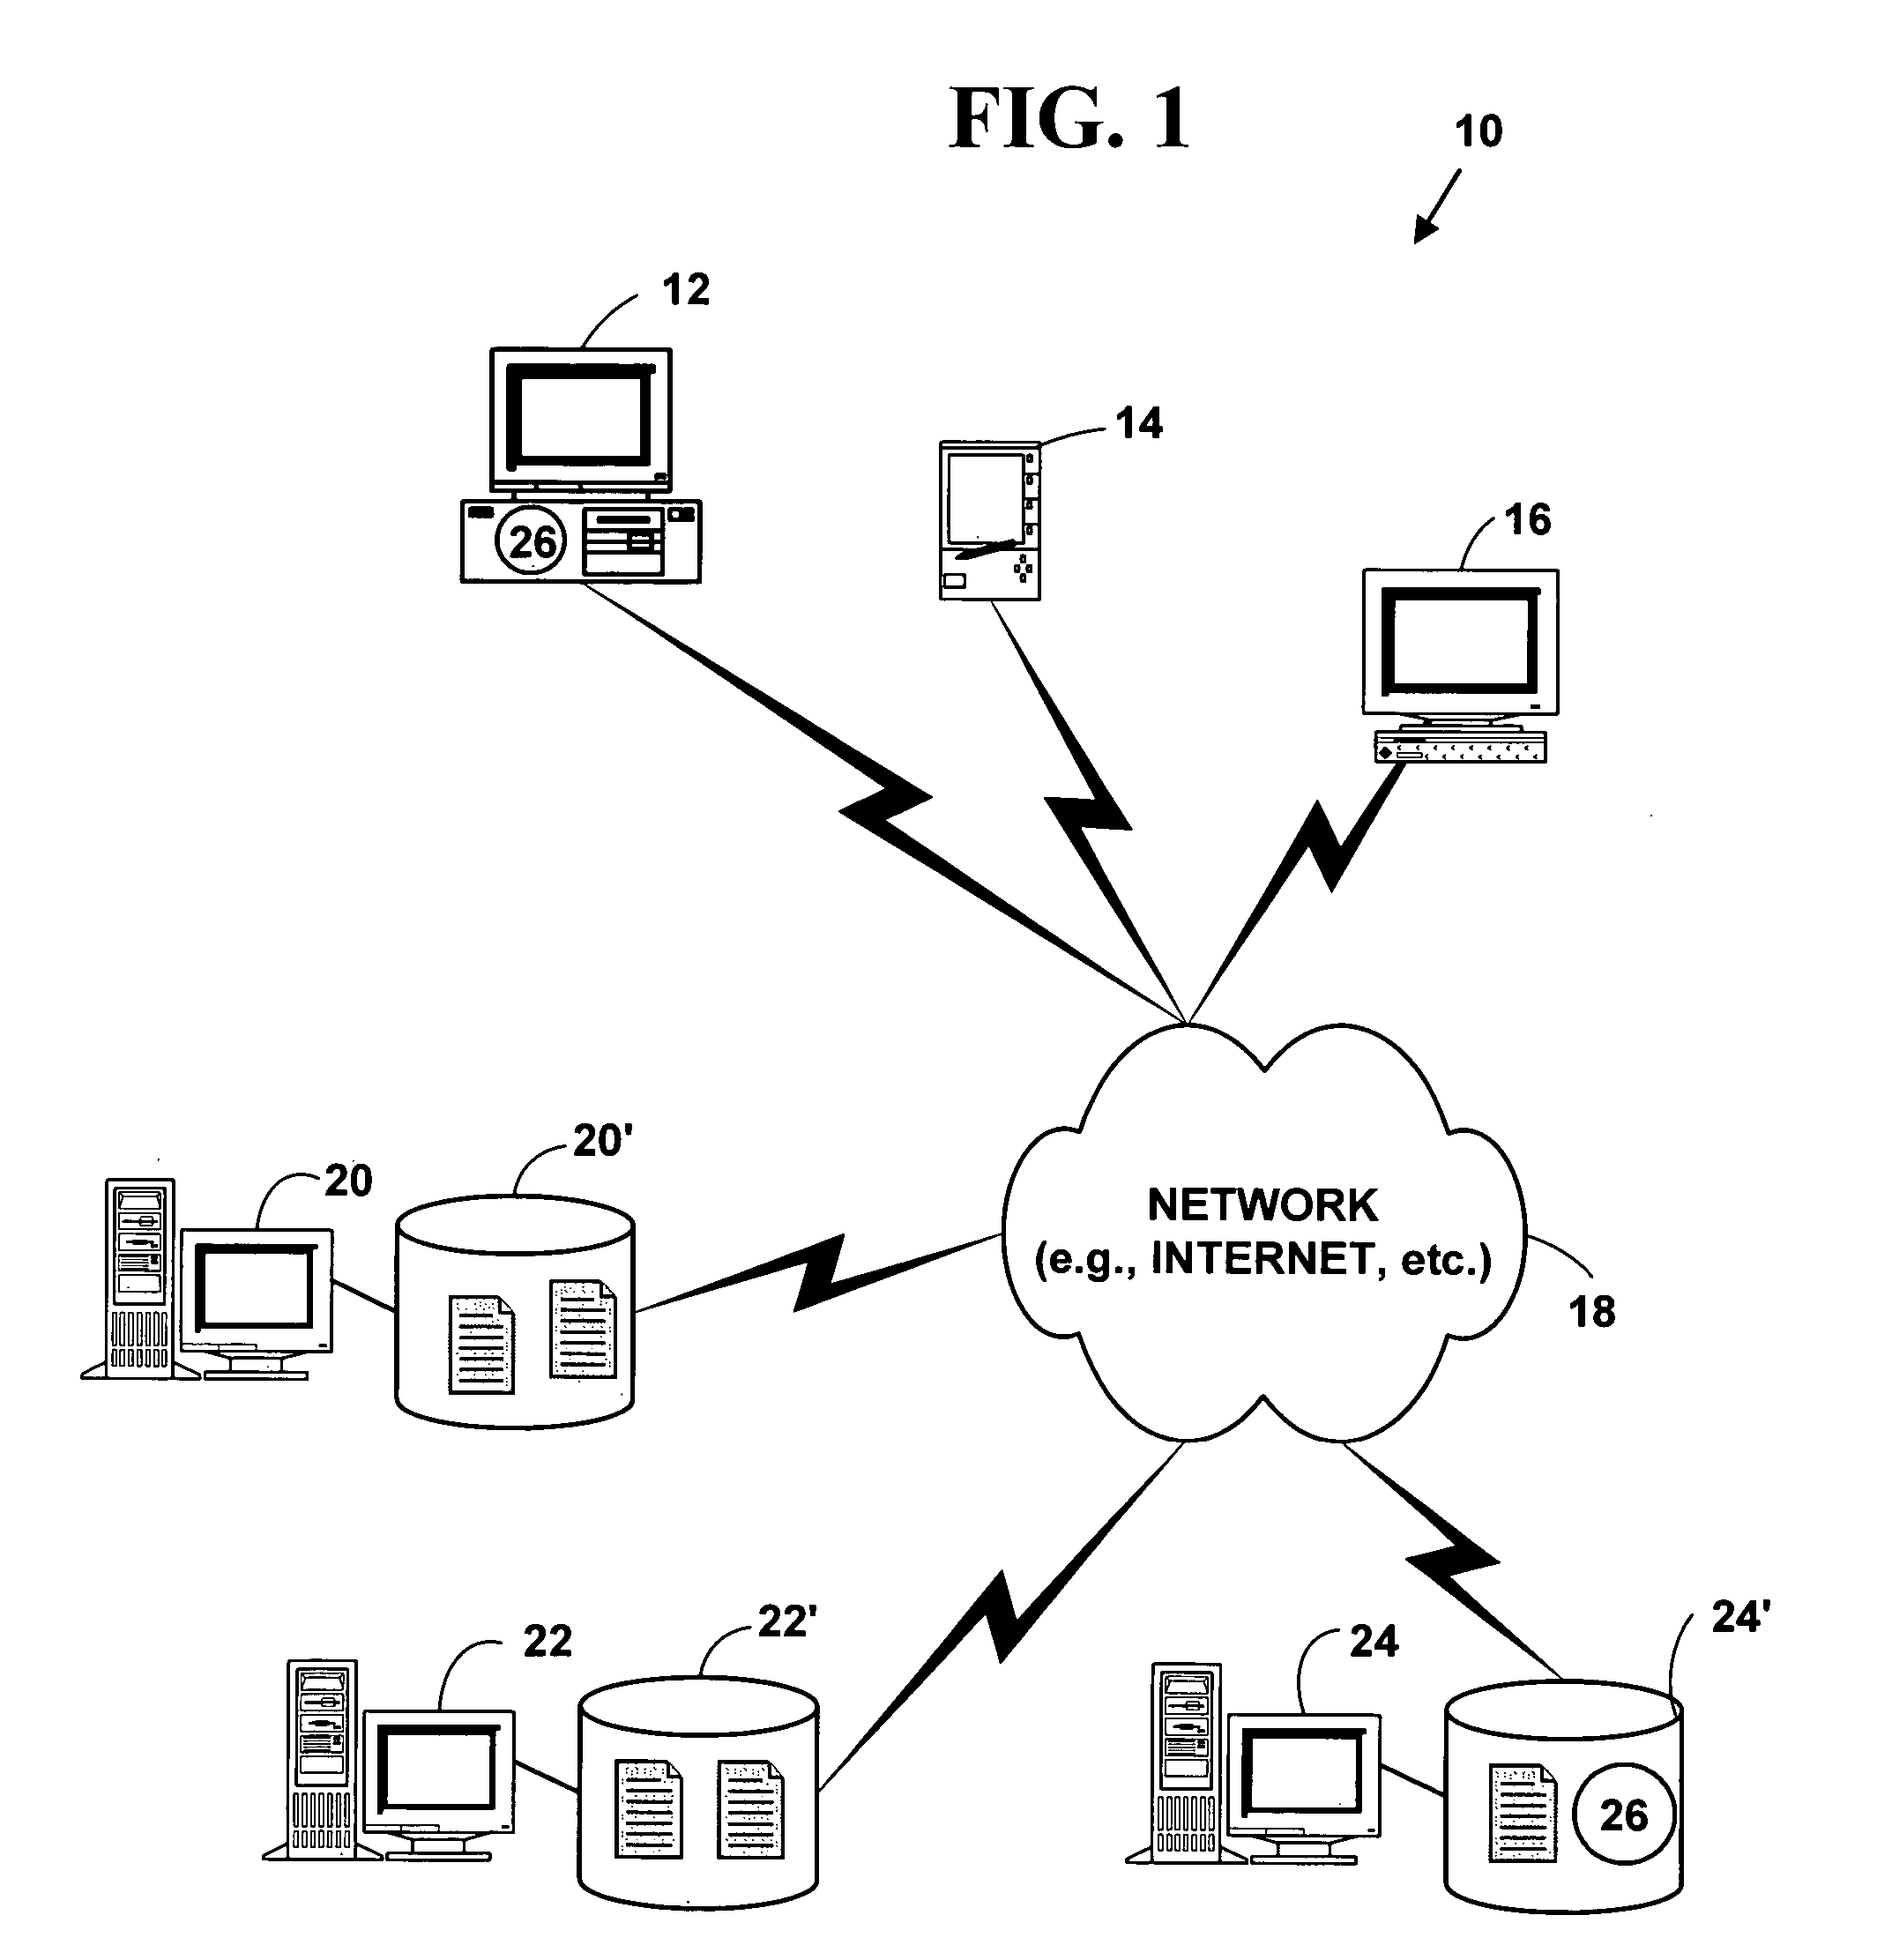 Method and system for managing non-game tasks with a game